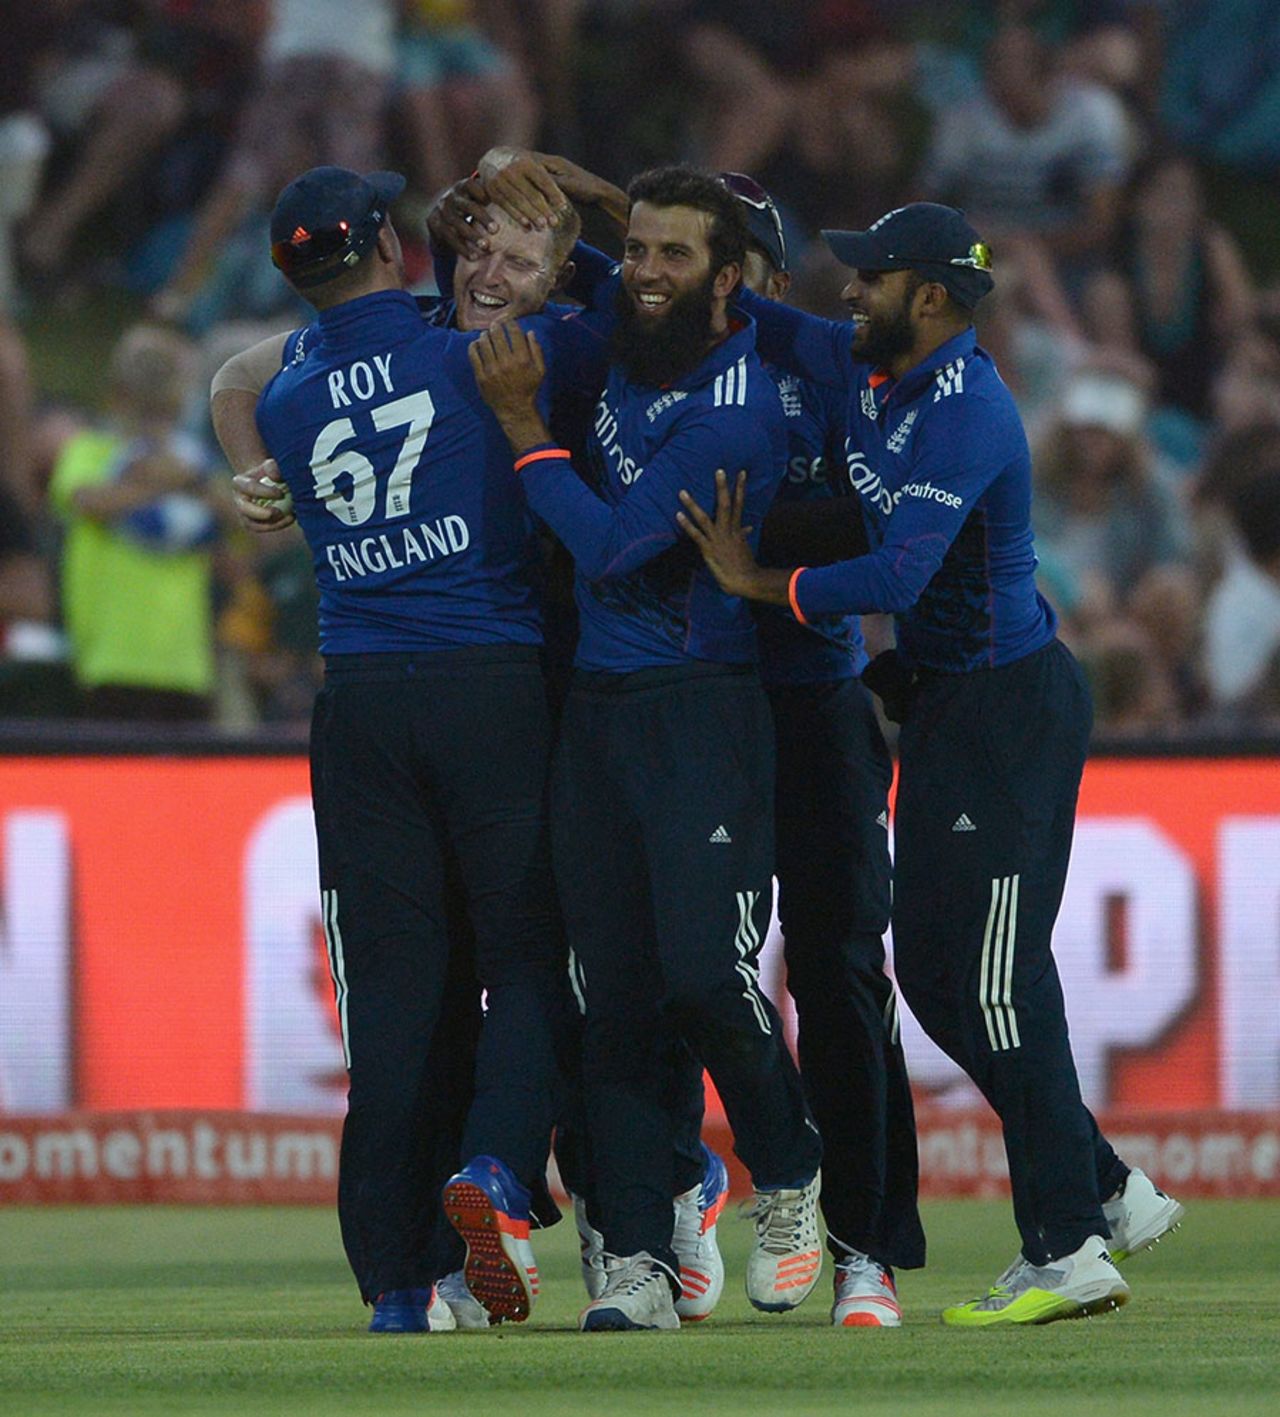 Ben Stokes is mobbed by his team-mates after a stunning catch to dismiss AB de Villiers, South Africa v England, 1st ODI, Bloemfontein, February 3, 2016